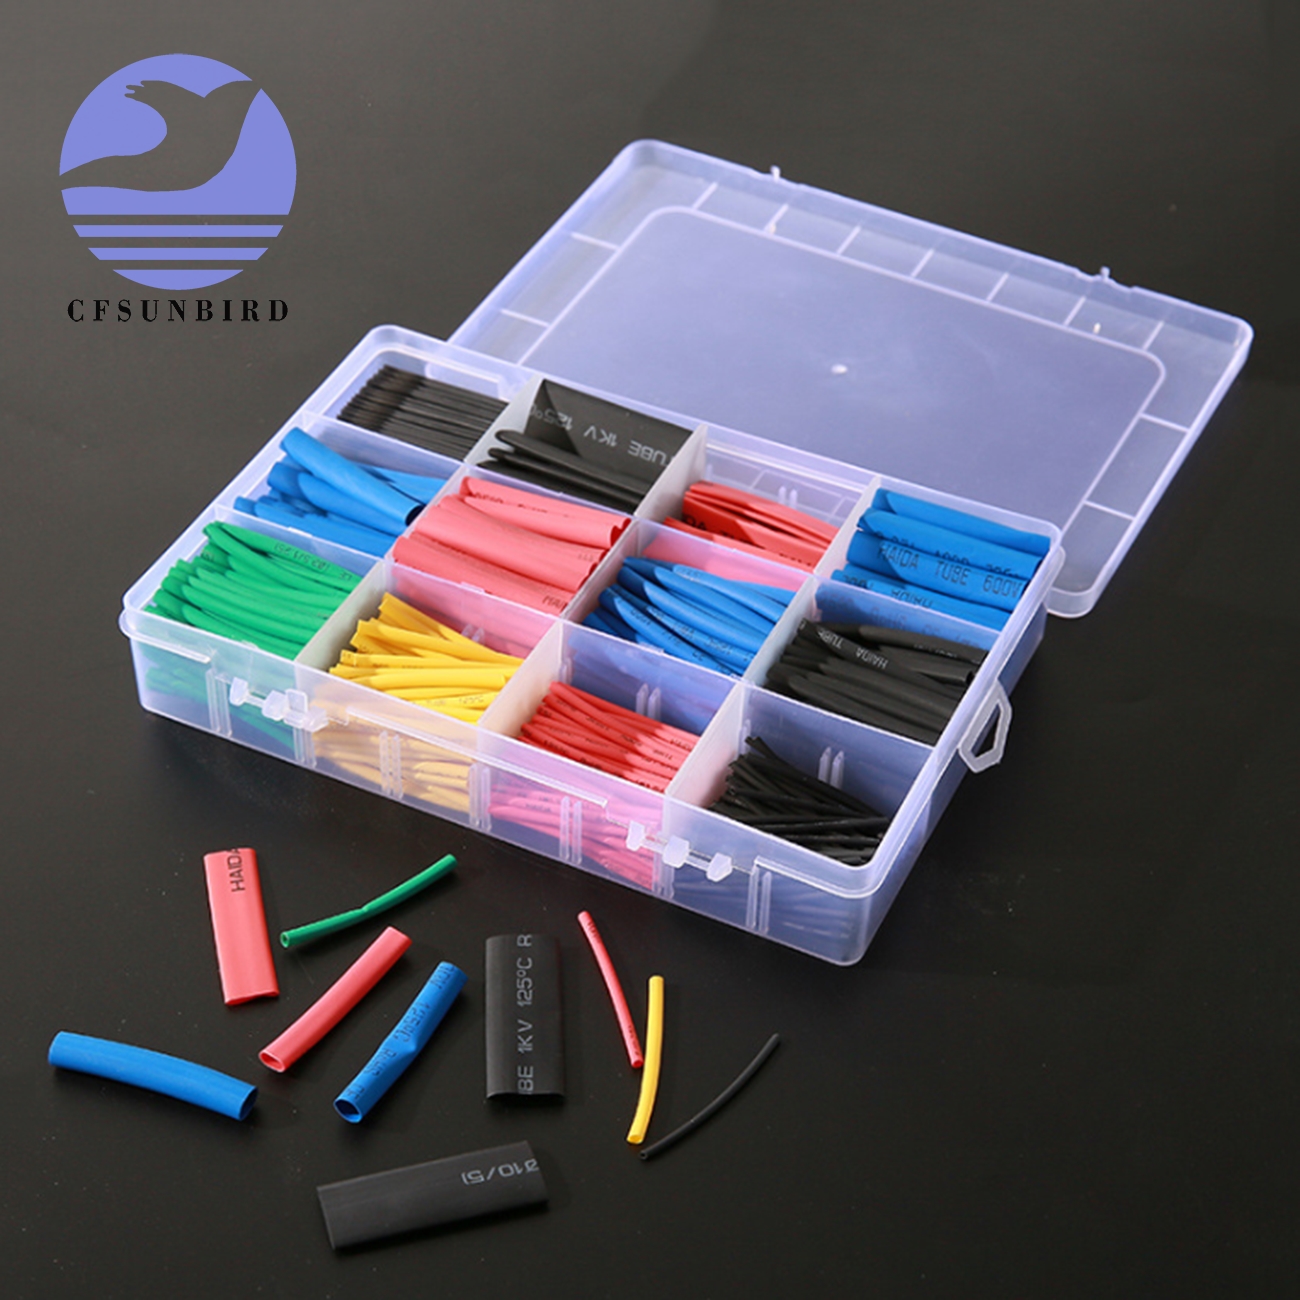 560 Pcs Heat Shrink Tubing 2:1 Electrical Wire Cable Wrap Assortment Electric Insulation Tube Kit With Box